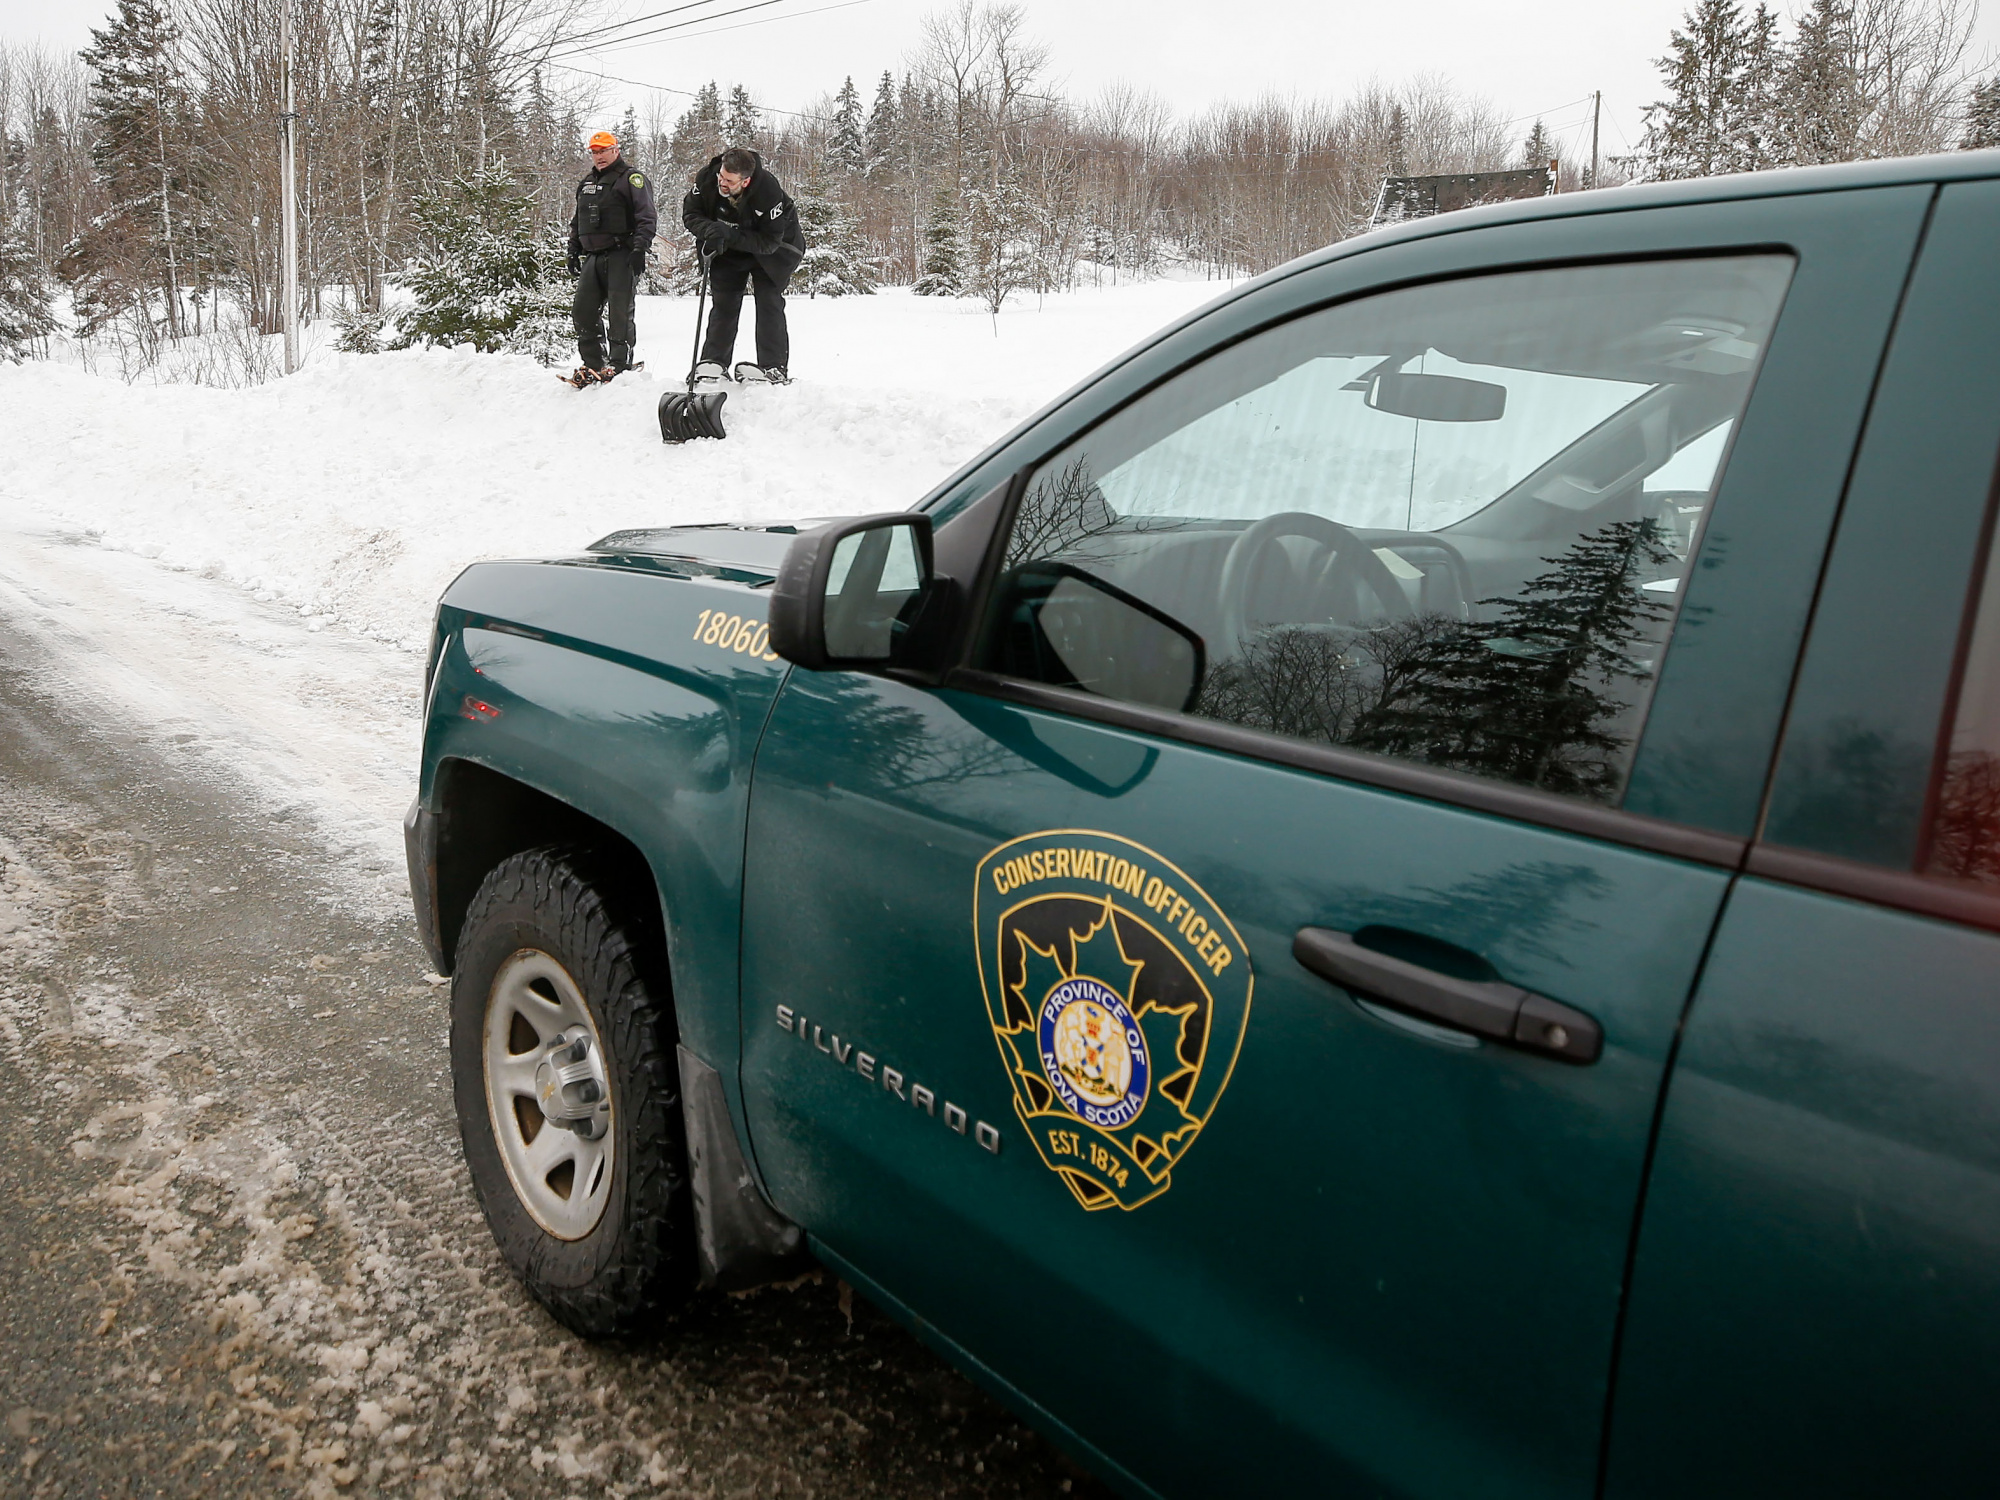 Photo of conservation officers' truck in the foreground and two officers on a snowbank